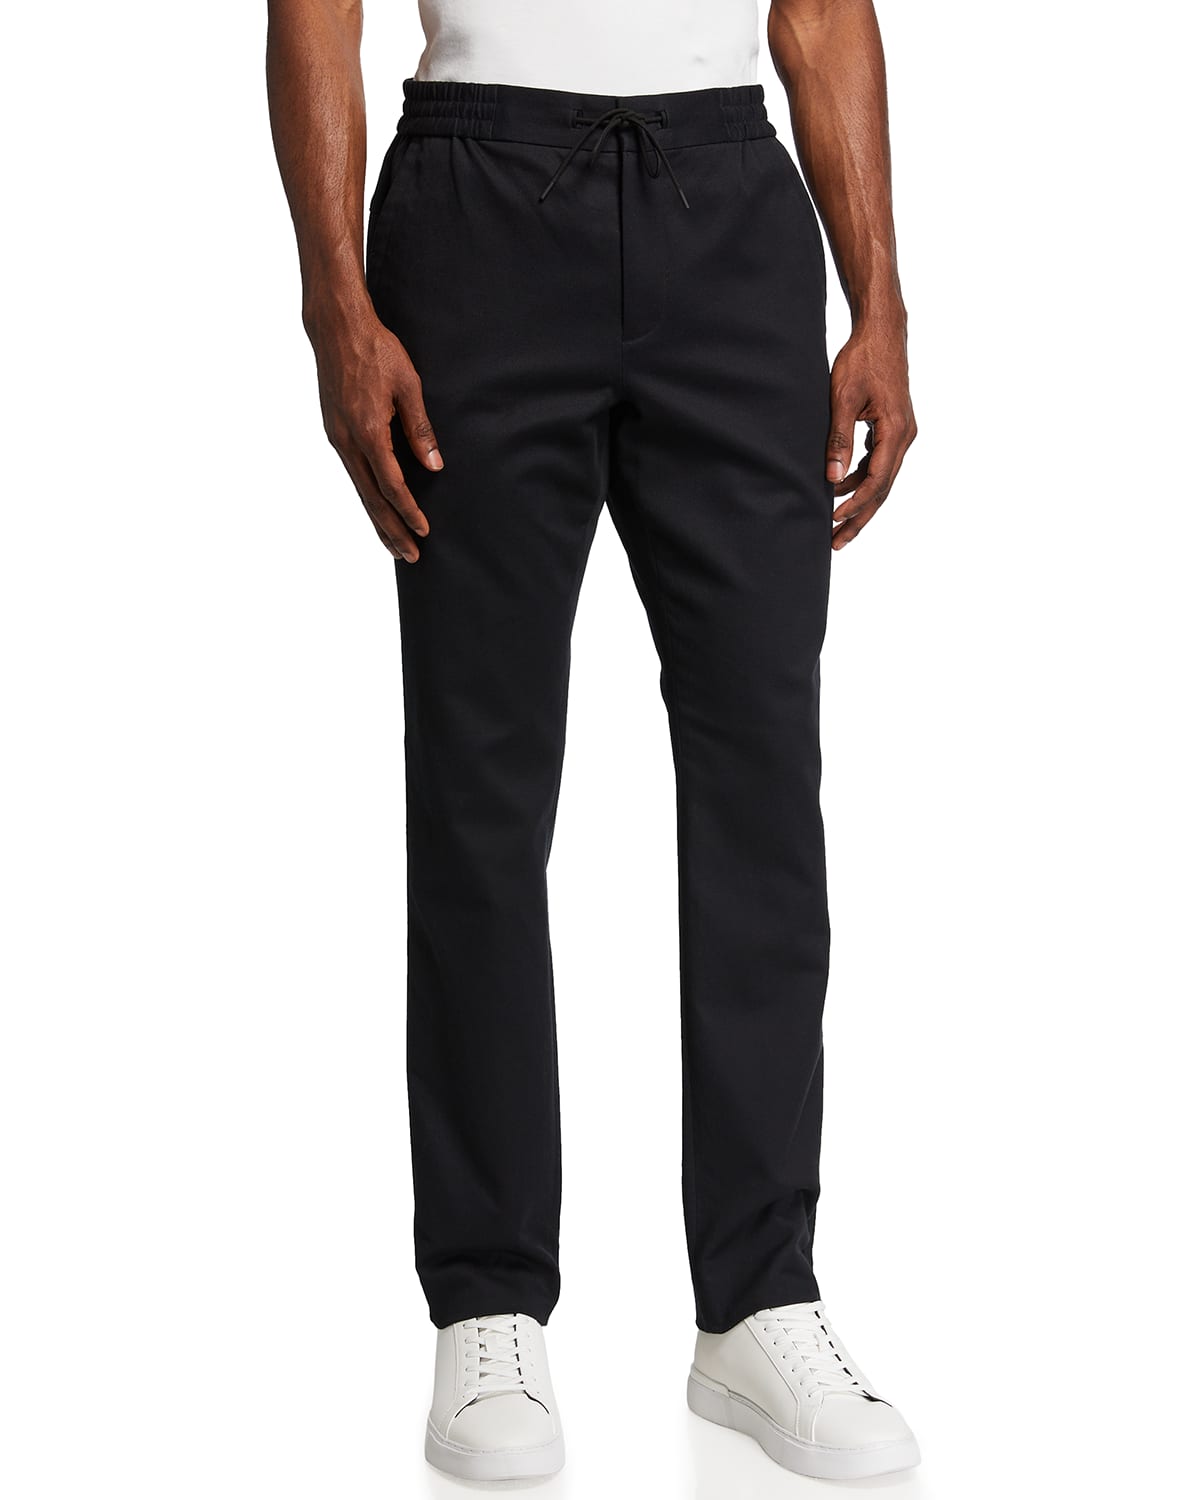 Vince Men's Cotton Twill Pull-On Pants